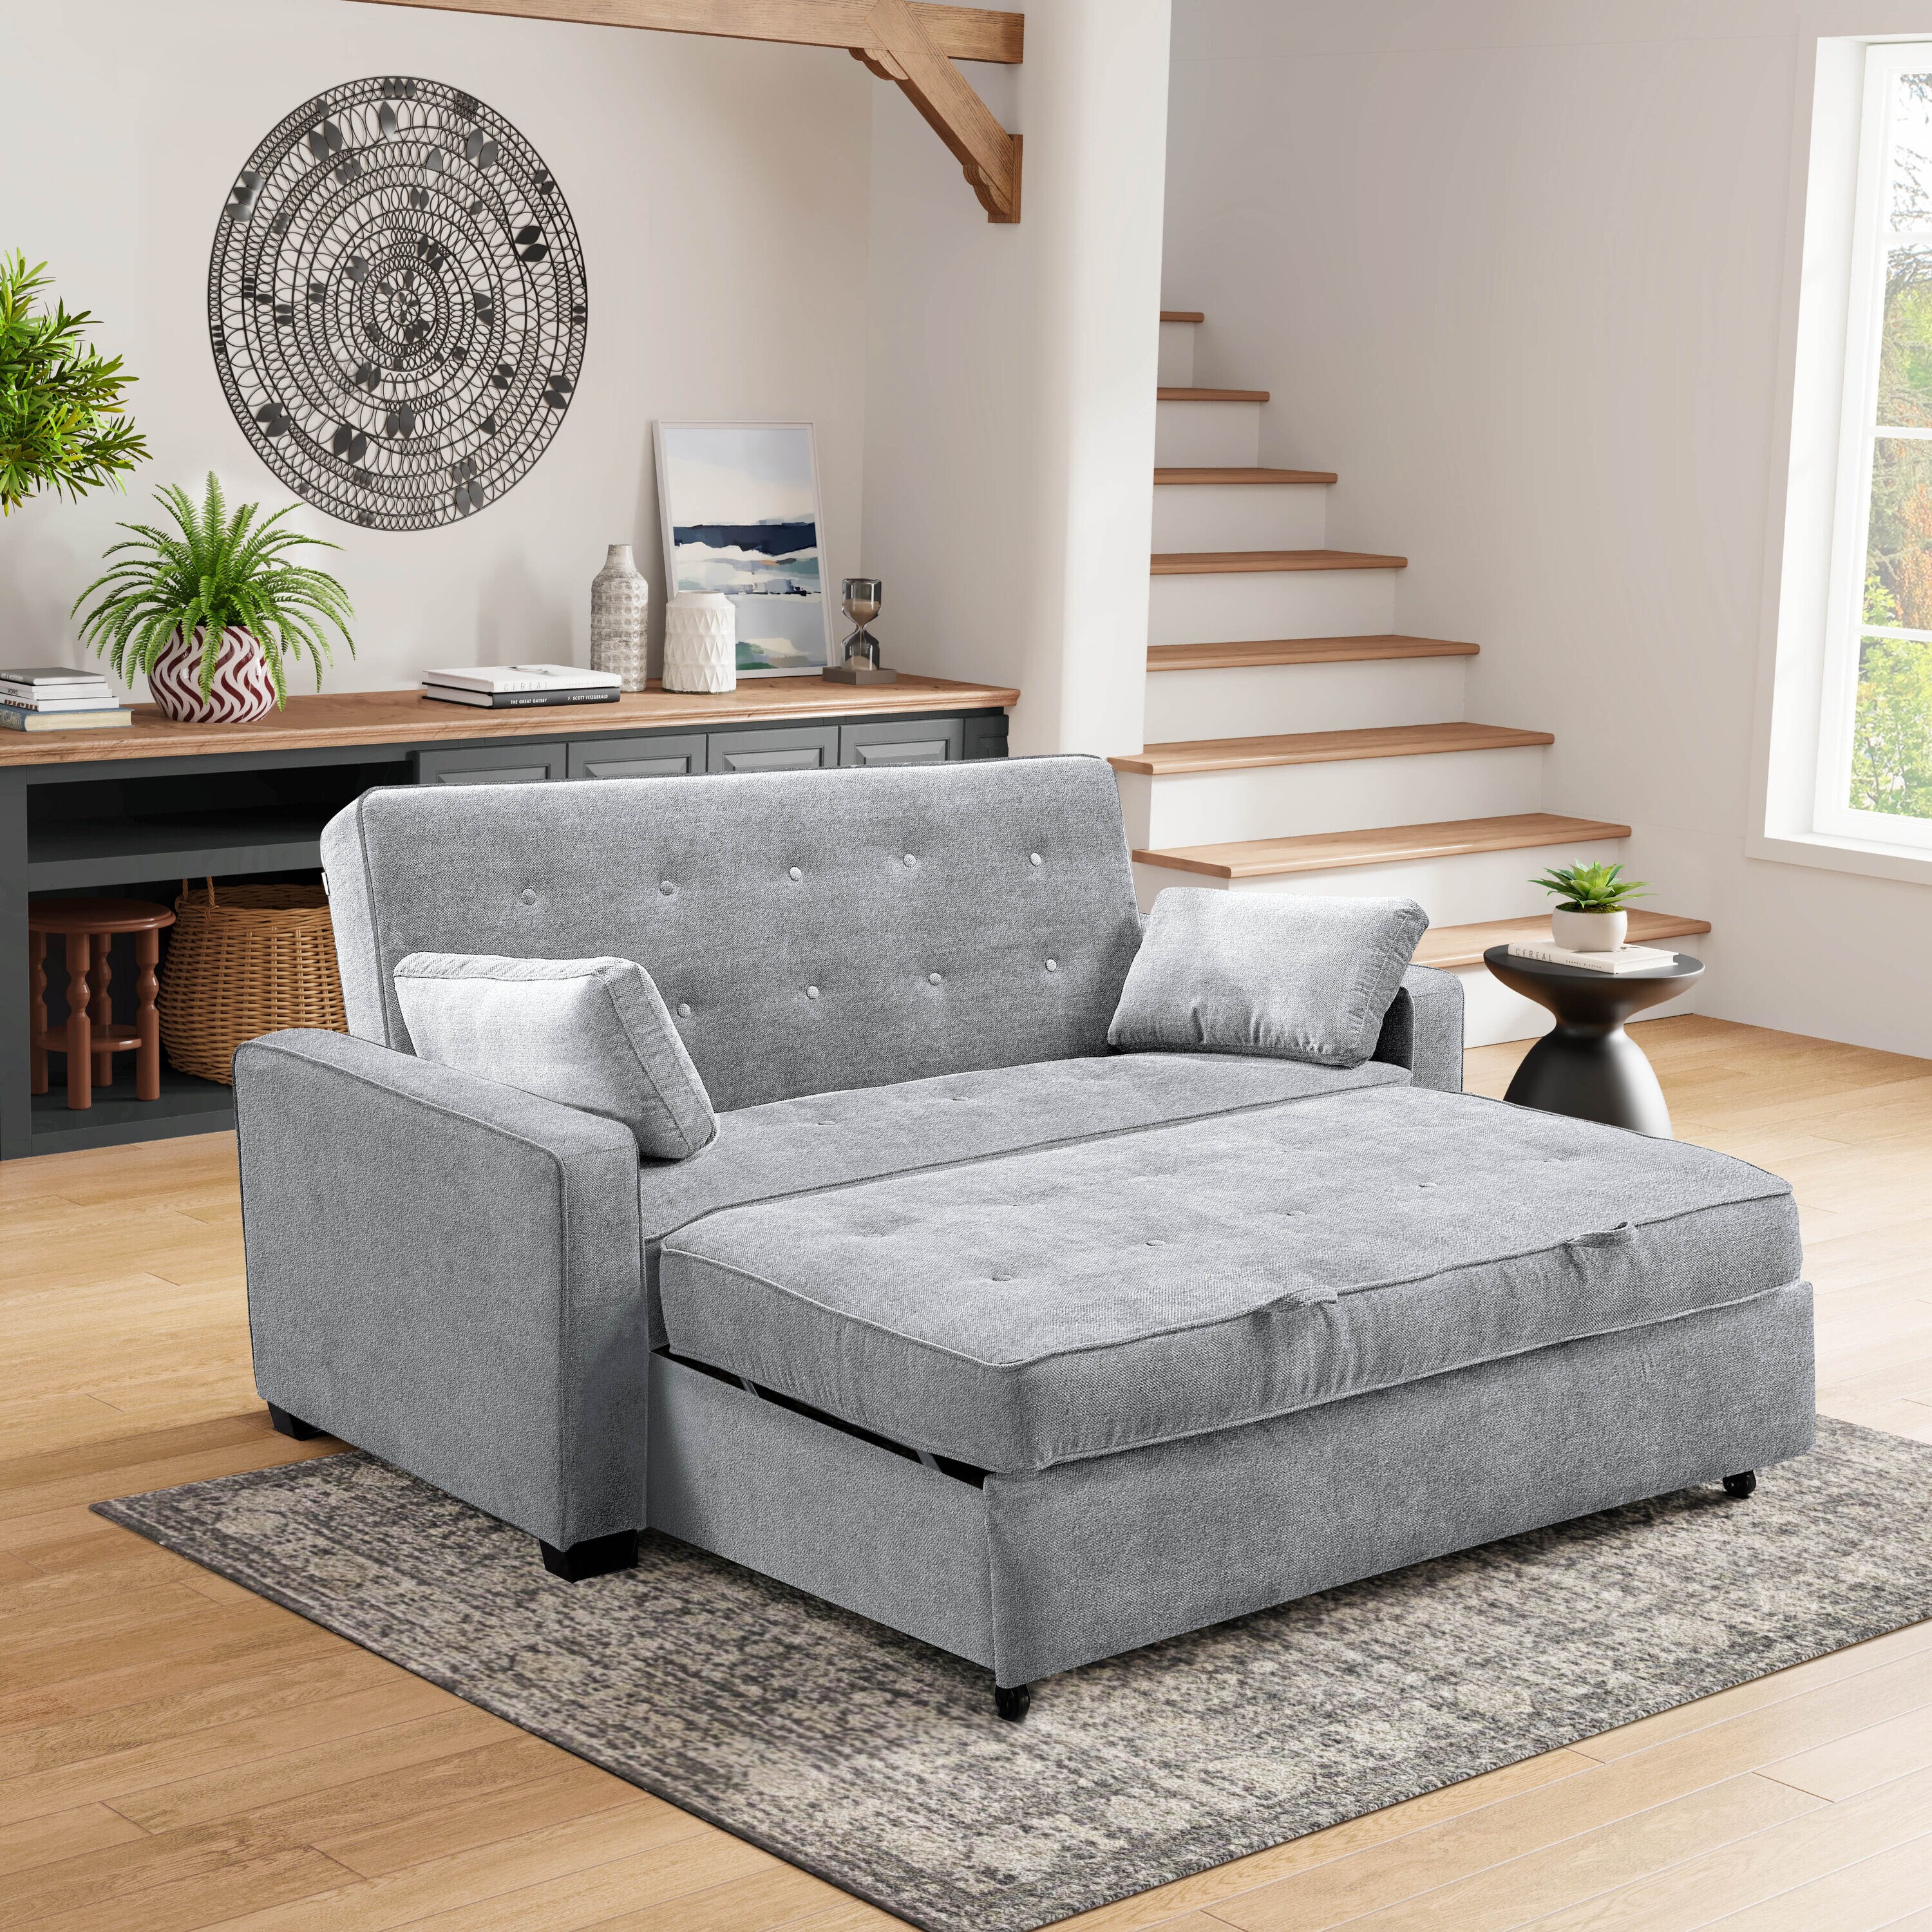 the Arya Loveseats at department 2-seater Polyester/Blend Modern 66.5-in Sofas Serta Couches, Light in Sofa Grey &